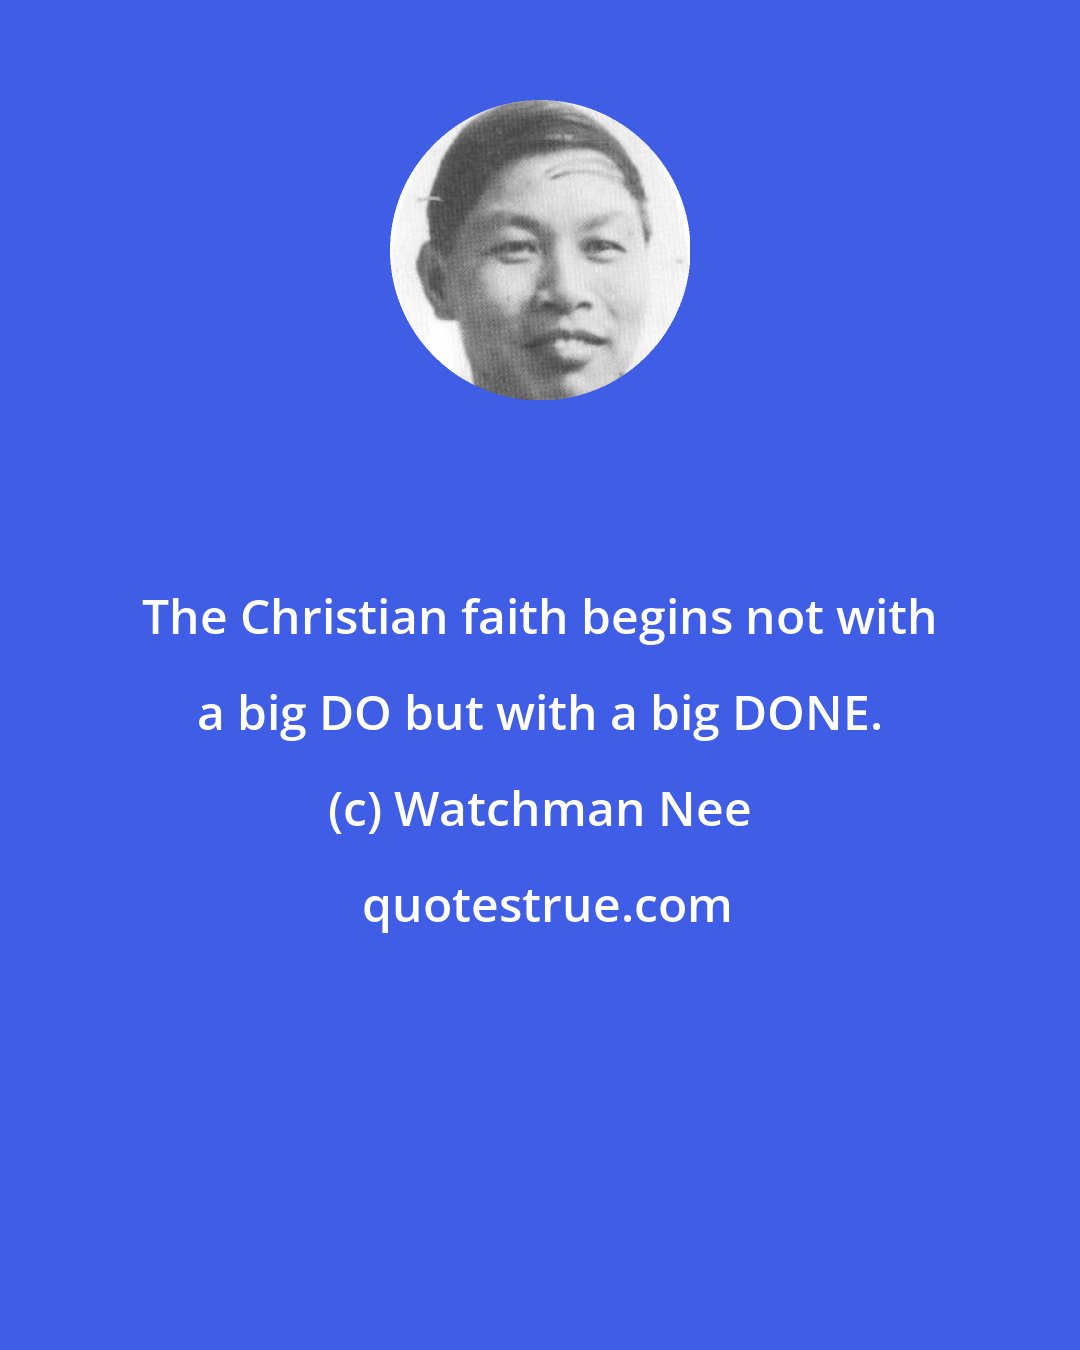 Watchman Nee: The Christian faith begins not with a big DO but with a big DONE.